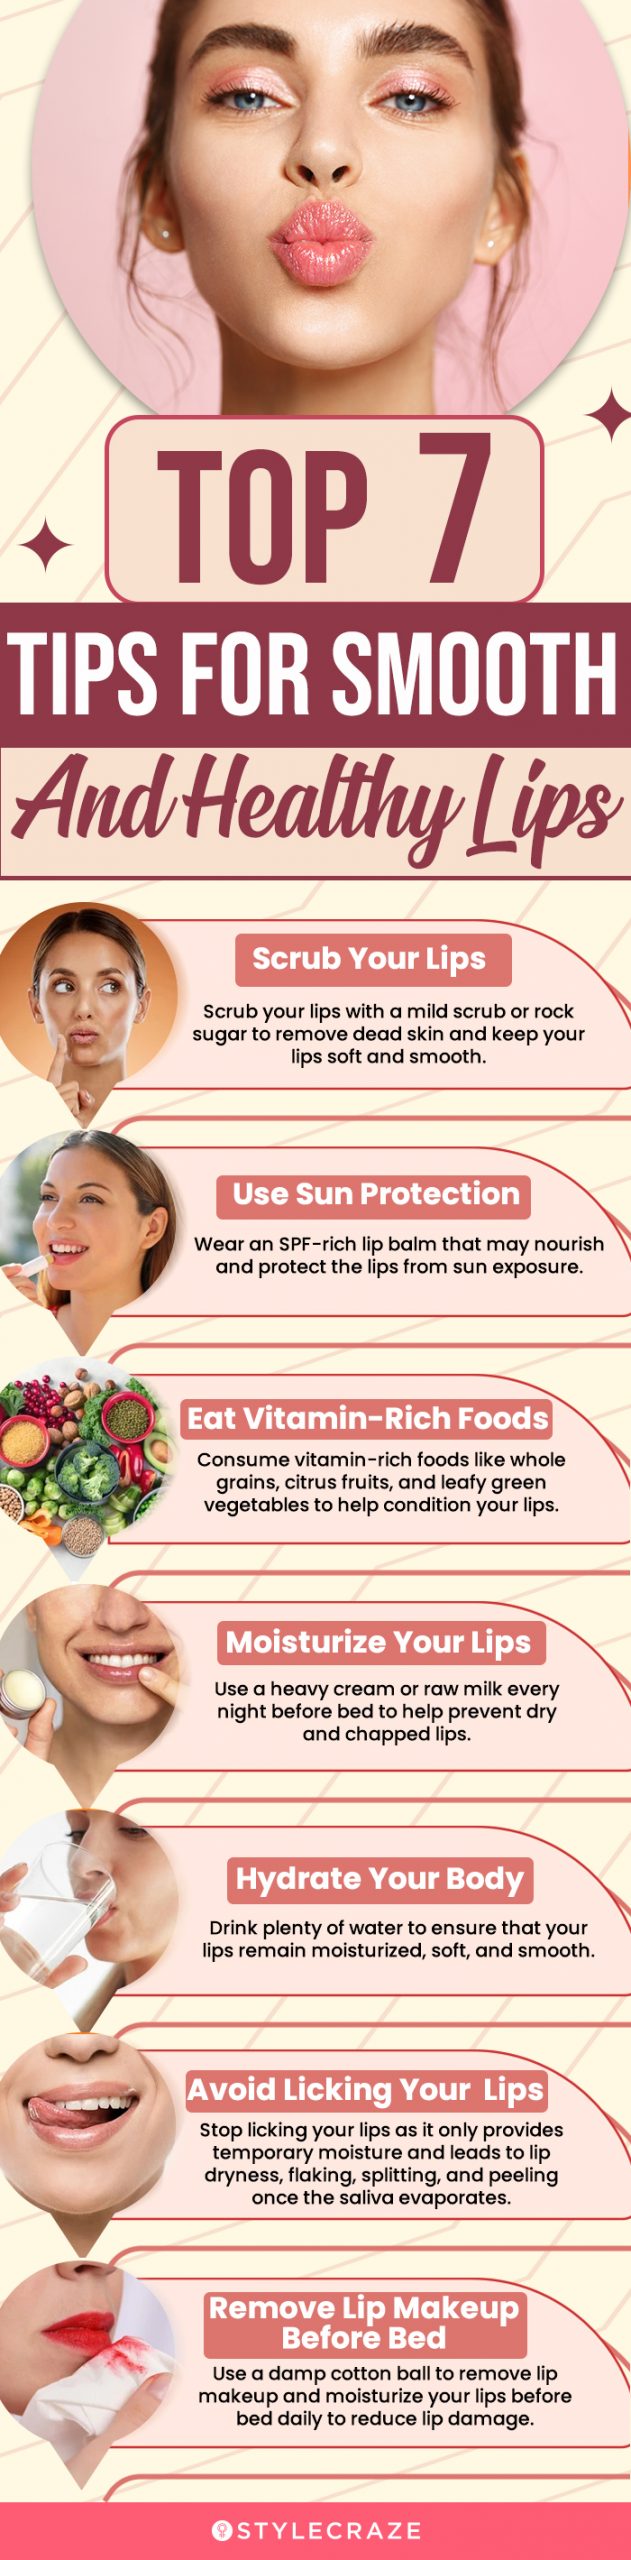 top 7 tips for smooth and healthy lips (infographic)